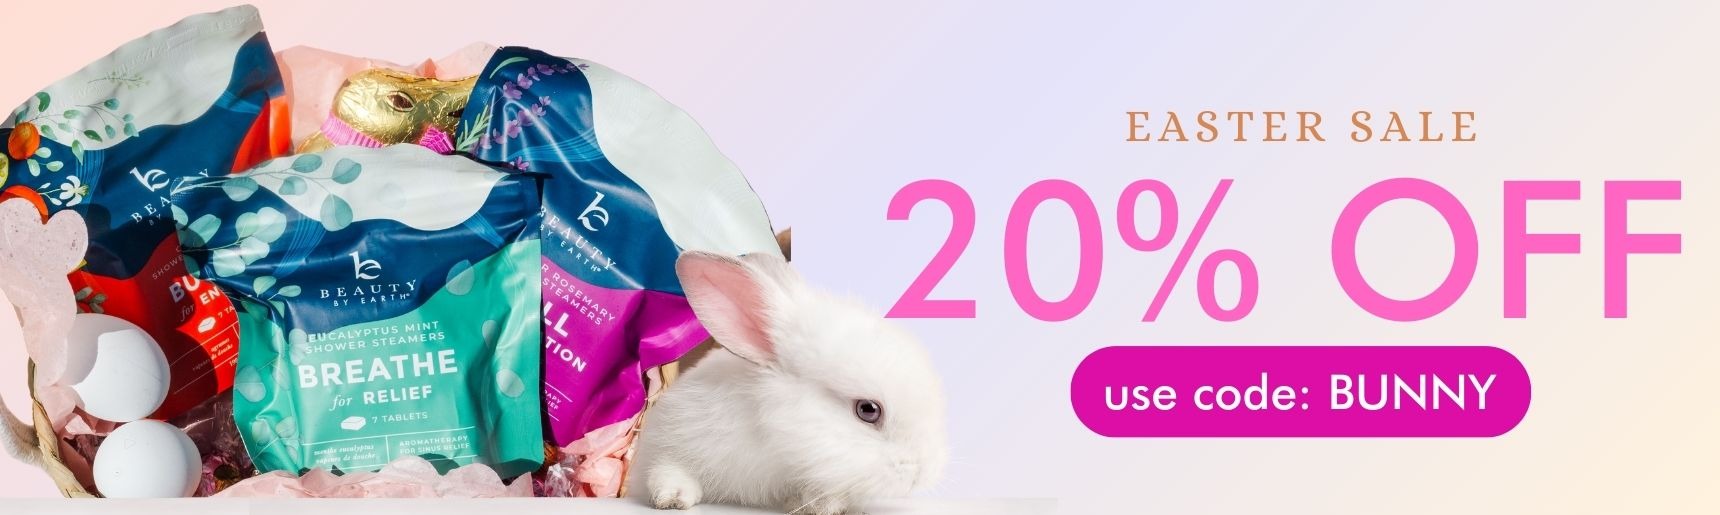 20% off with code Bunny!